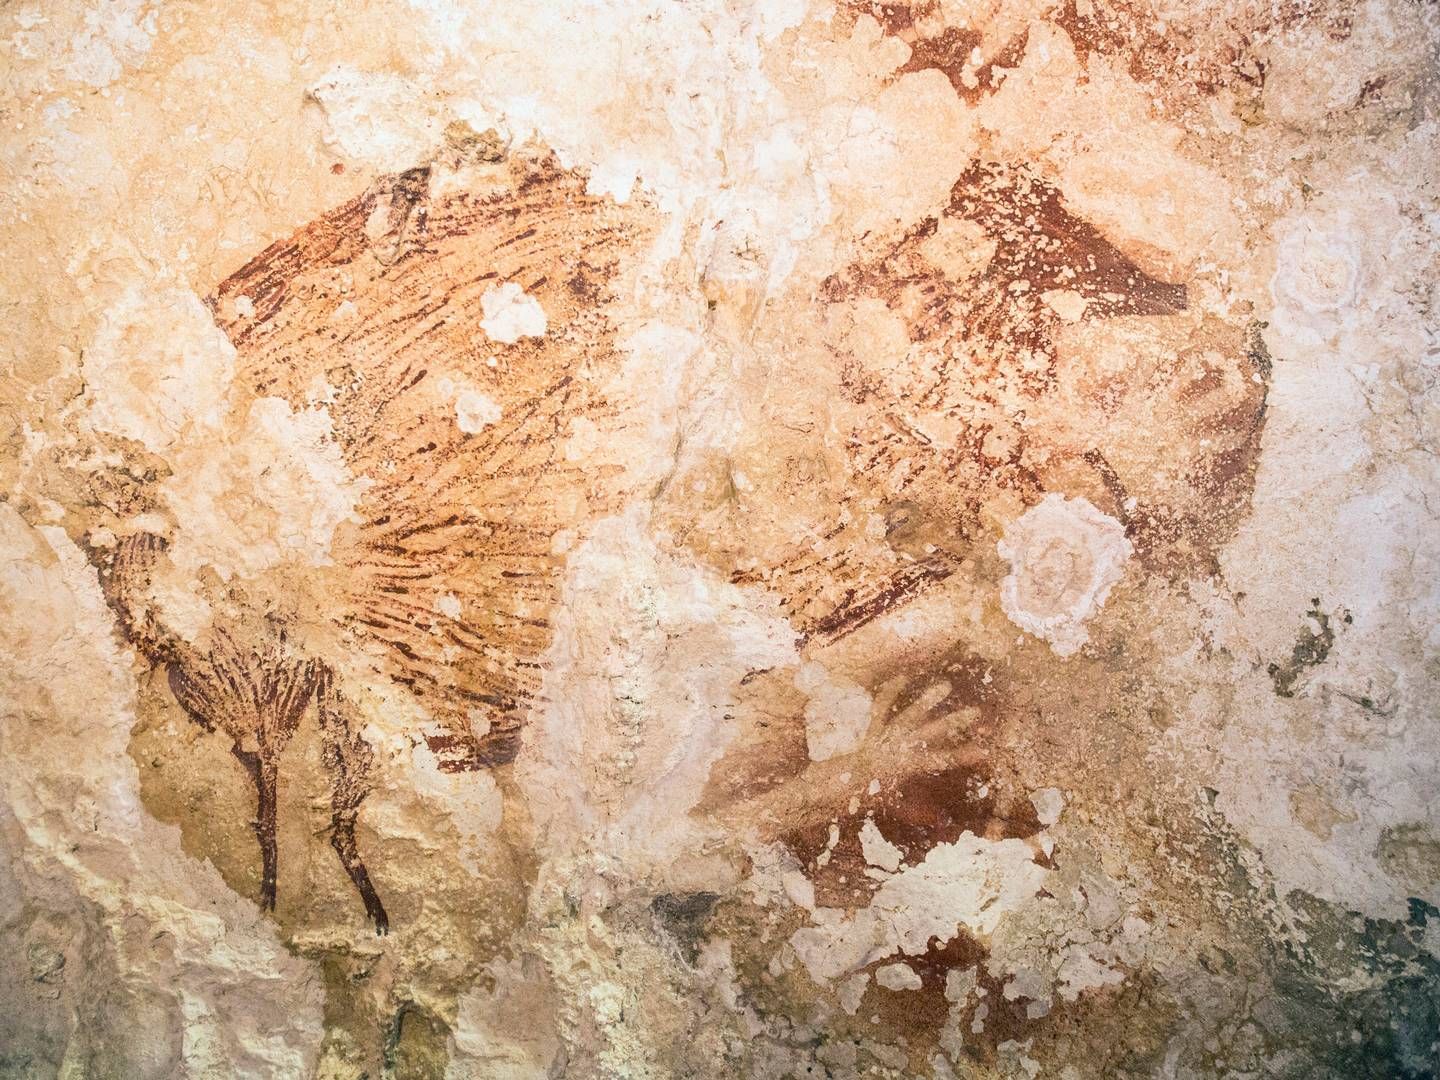 At least 40,000 years old paintings that depict animals discovered in caves on the island of Sulawesi are rewriting the history of art. | Photo: Handout/Reuters/Ritzau Scanpix